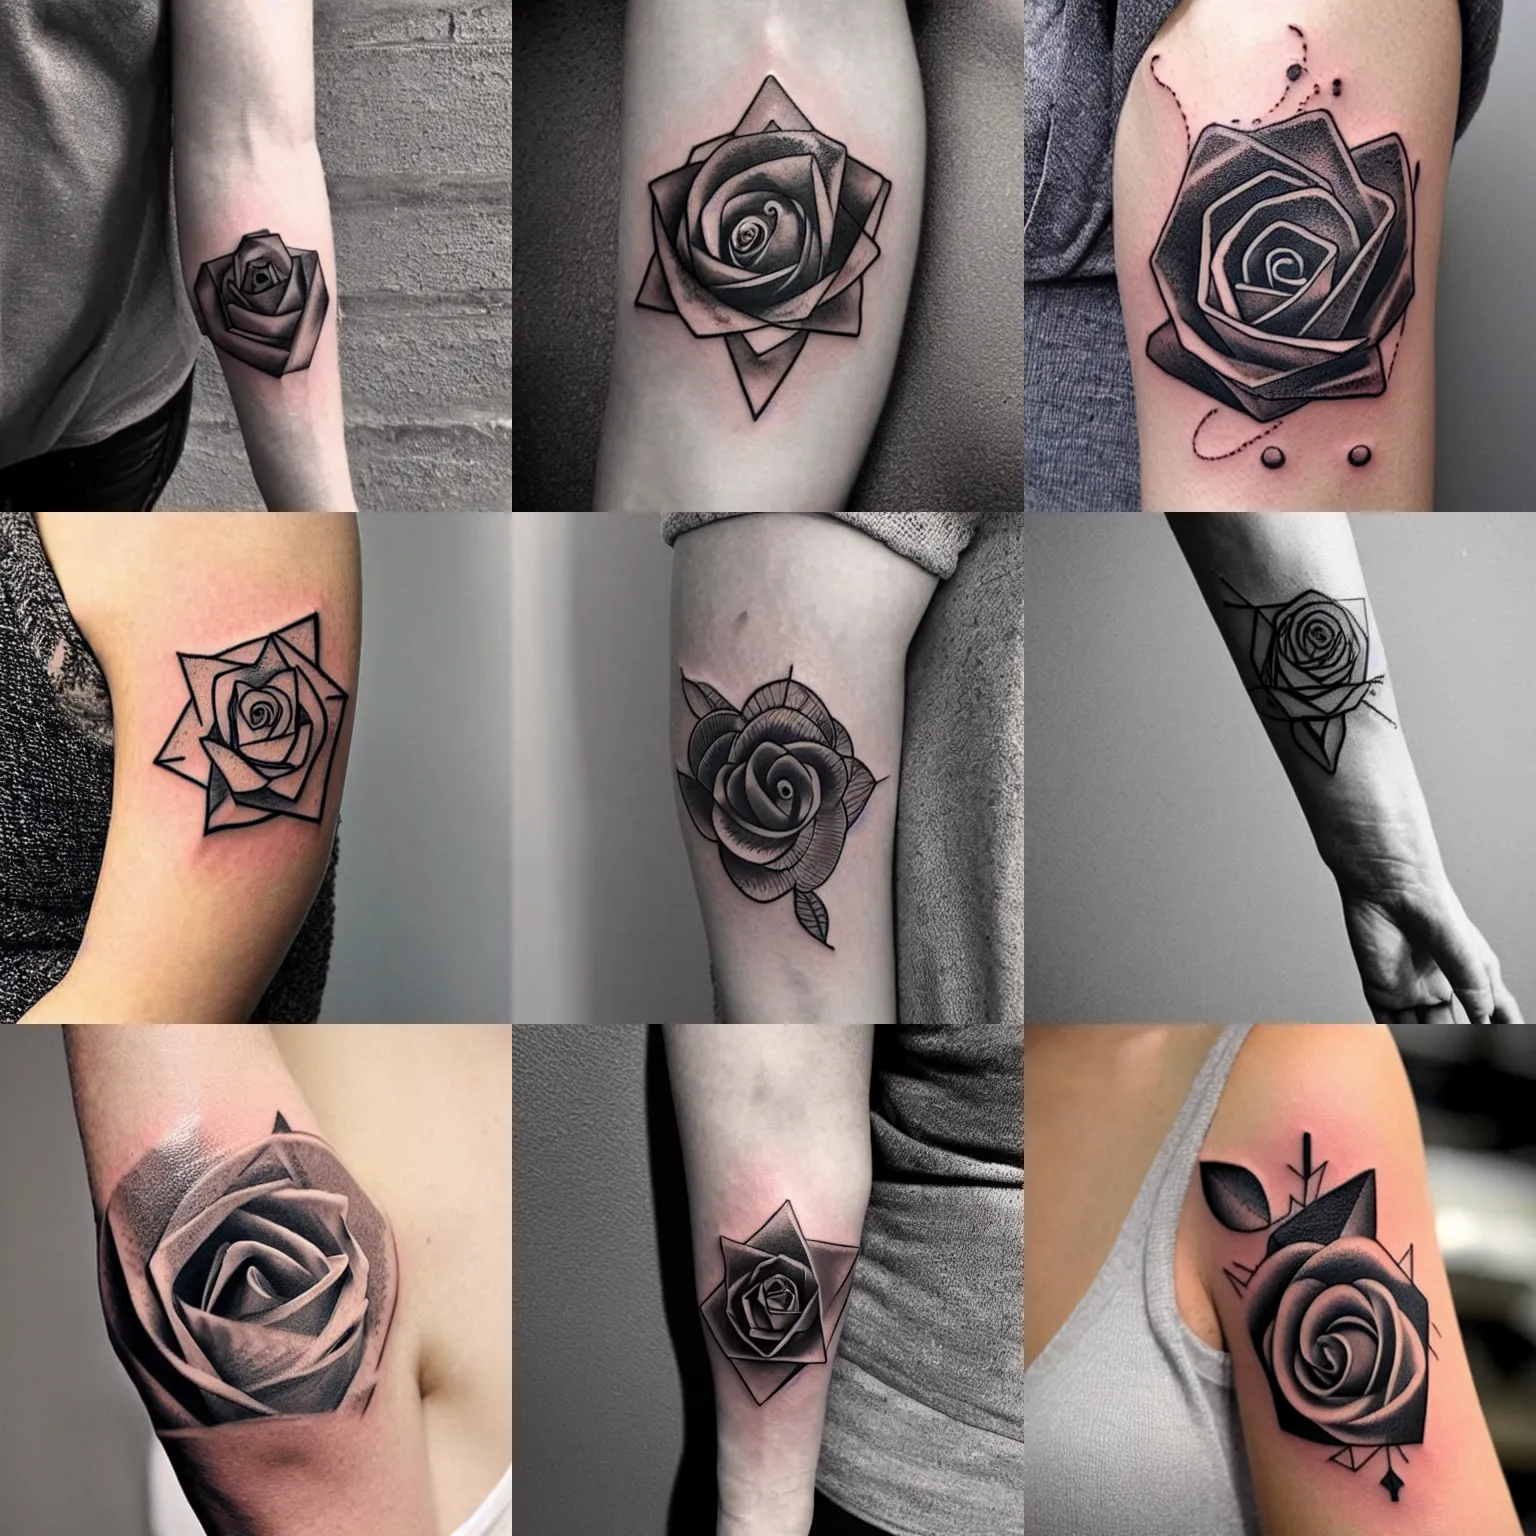 Rose tattoos: meaning, placement, ideas - Our guide • Tattoodo